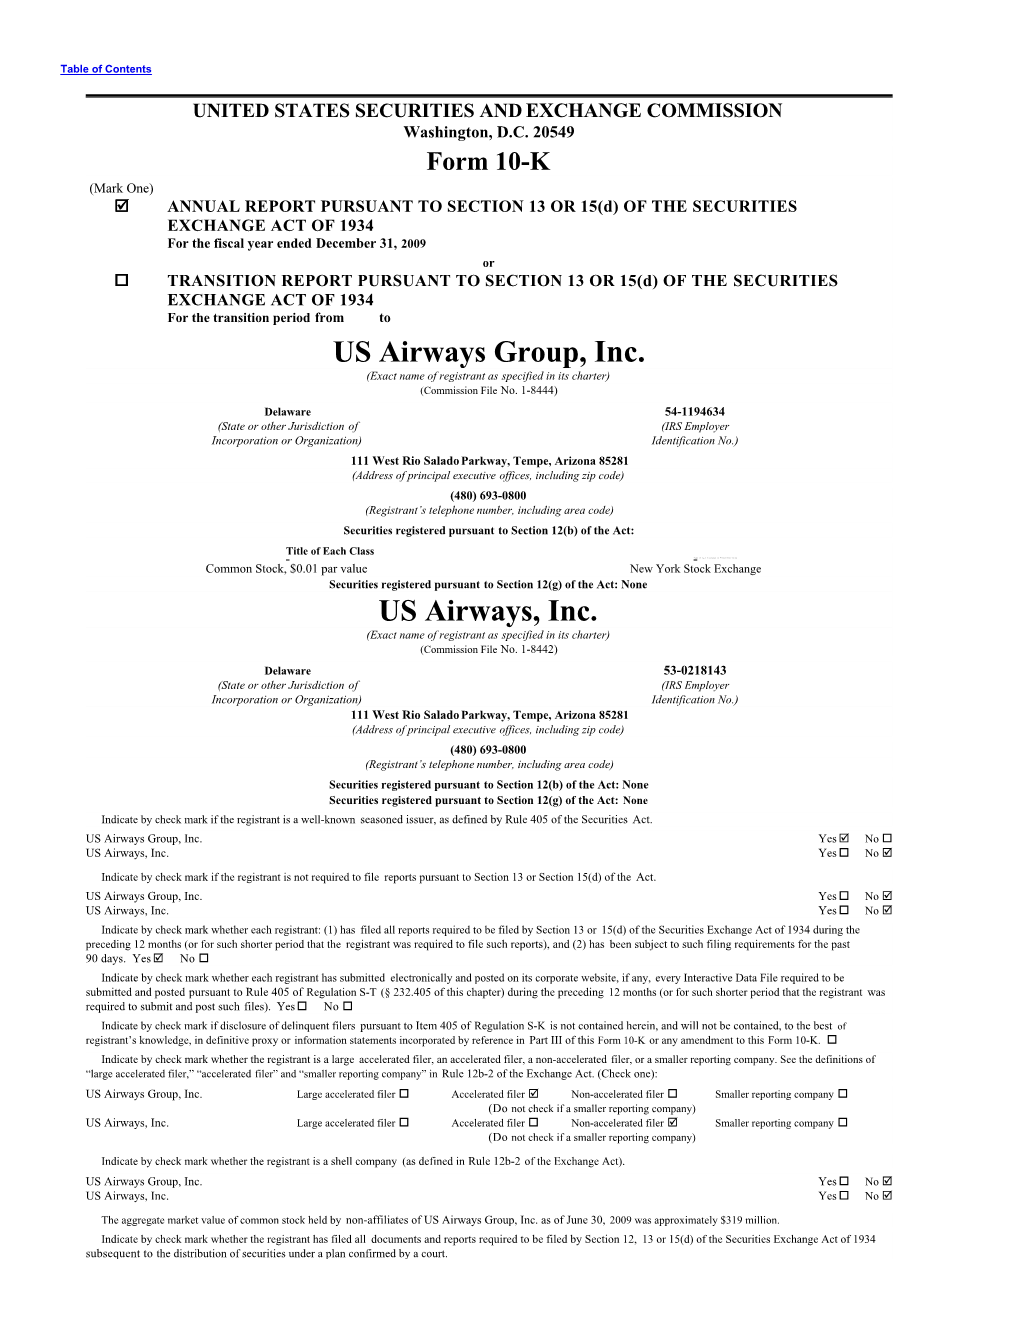 US Airways Group, Inc. US Airways, Inc. Form 10-K Year Ended December 31, 2009 Table of Contents